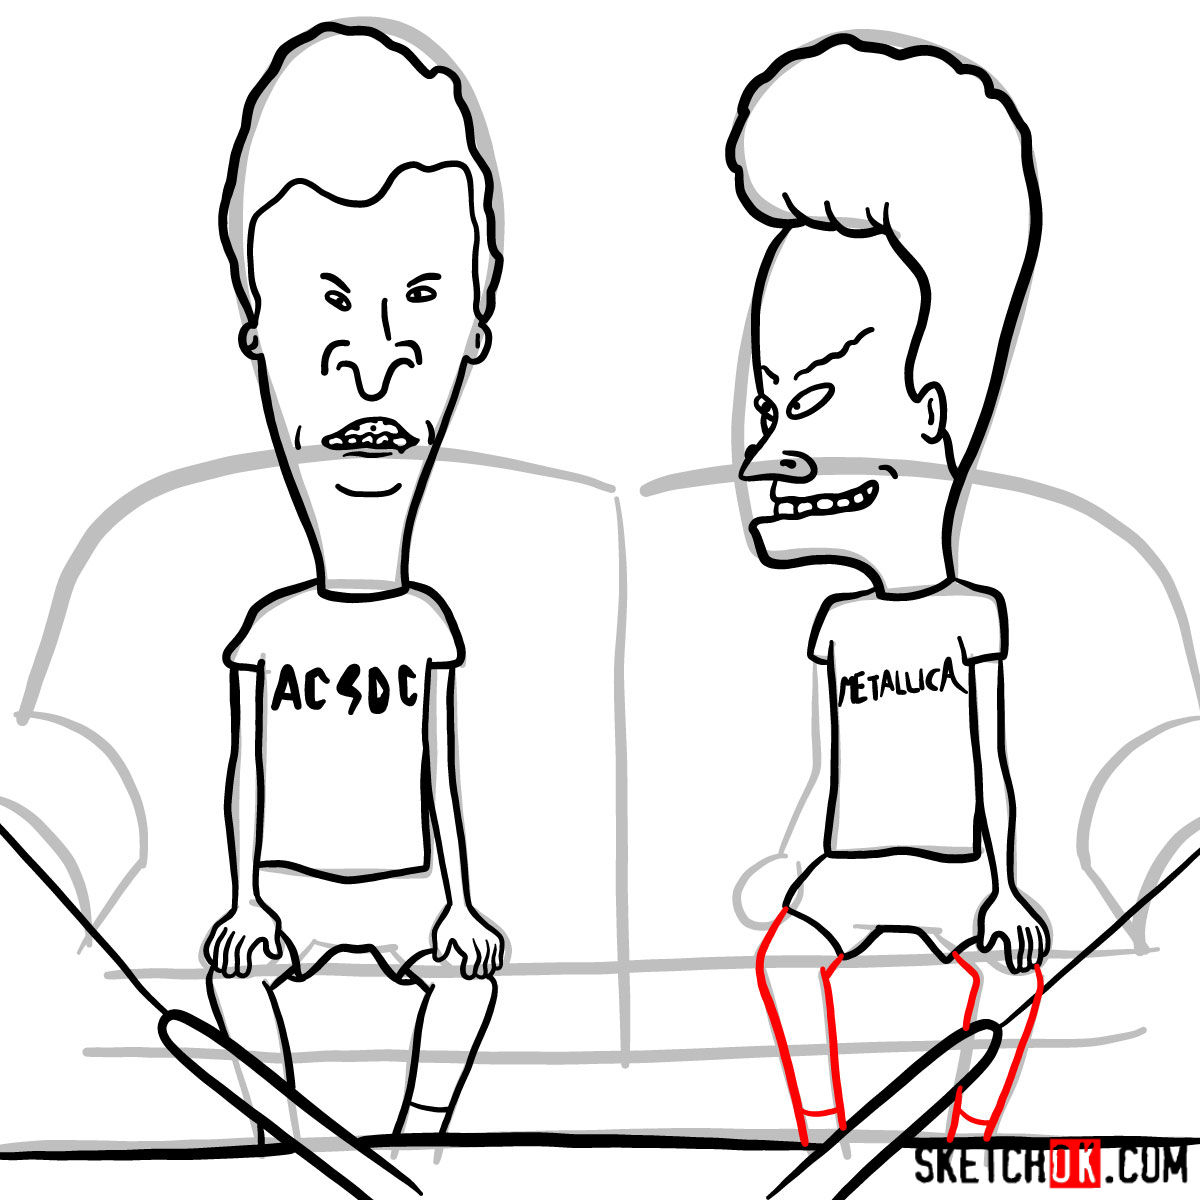 How to draw Beavis and Butt-Head - step 17